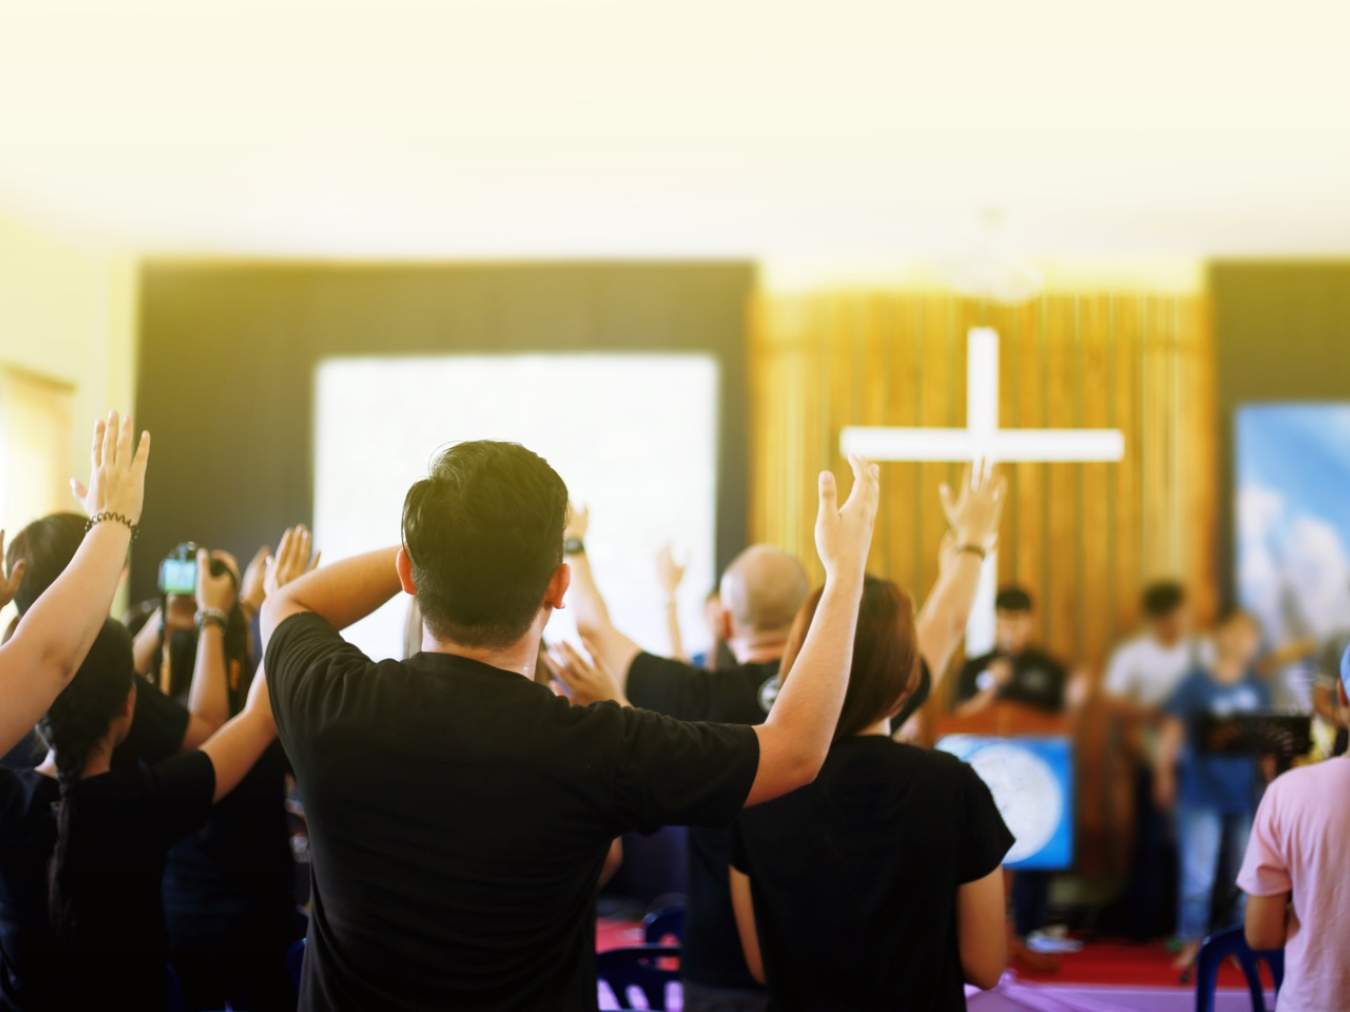 An American Christian youth conference. As in India, dedicated Christian youth are a minority, but are like Daniel and his three friends in today’s world.